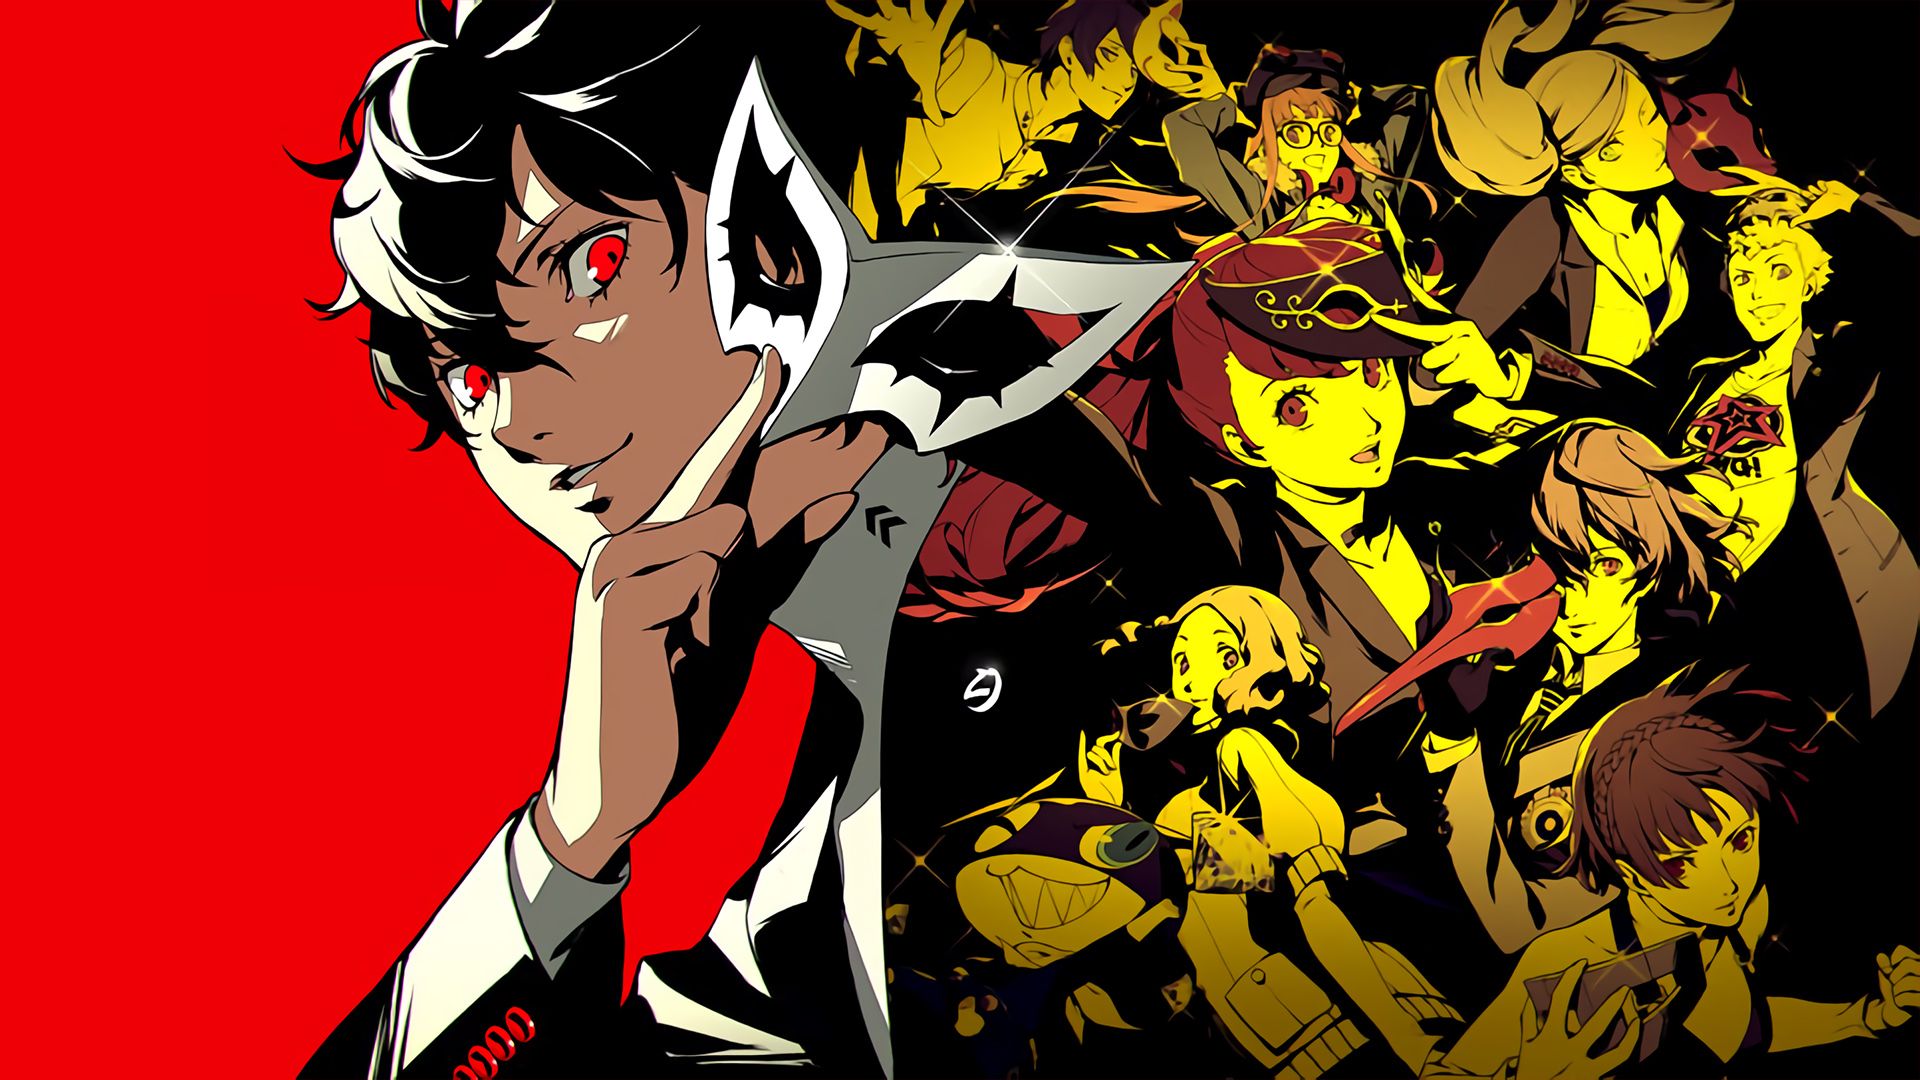 4K & HD Persona 5 Wallpaper You Need to Make Your Desktop Background